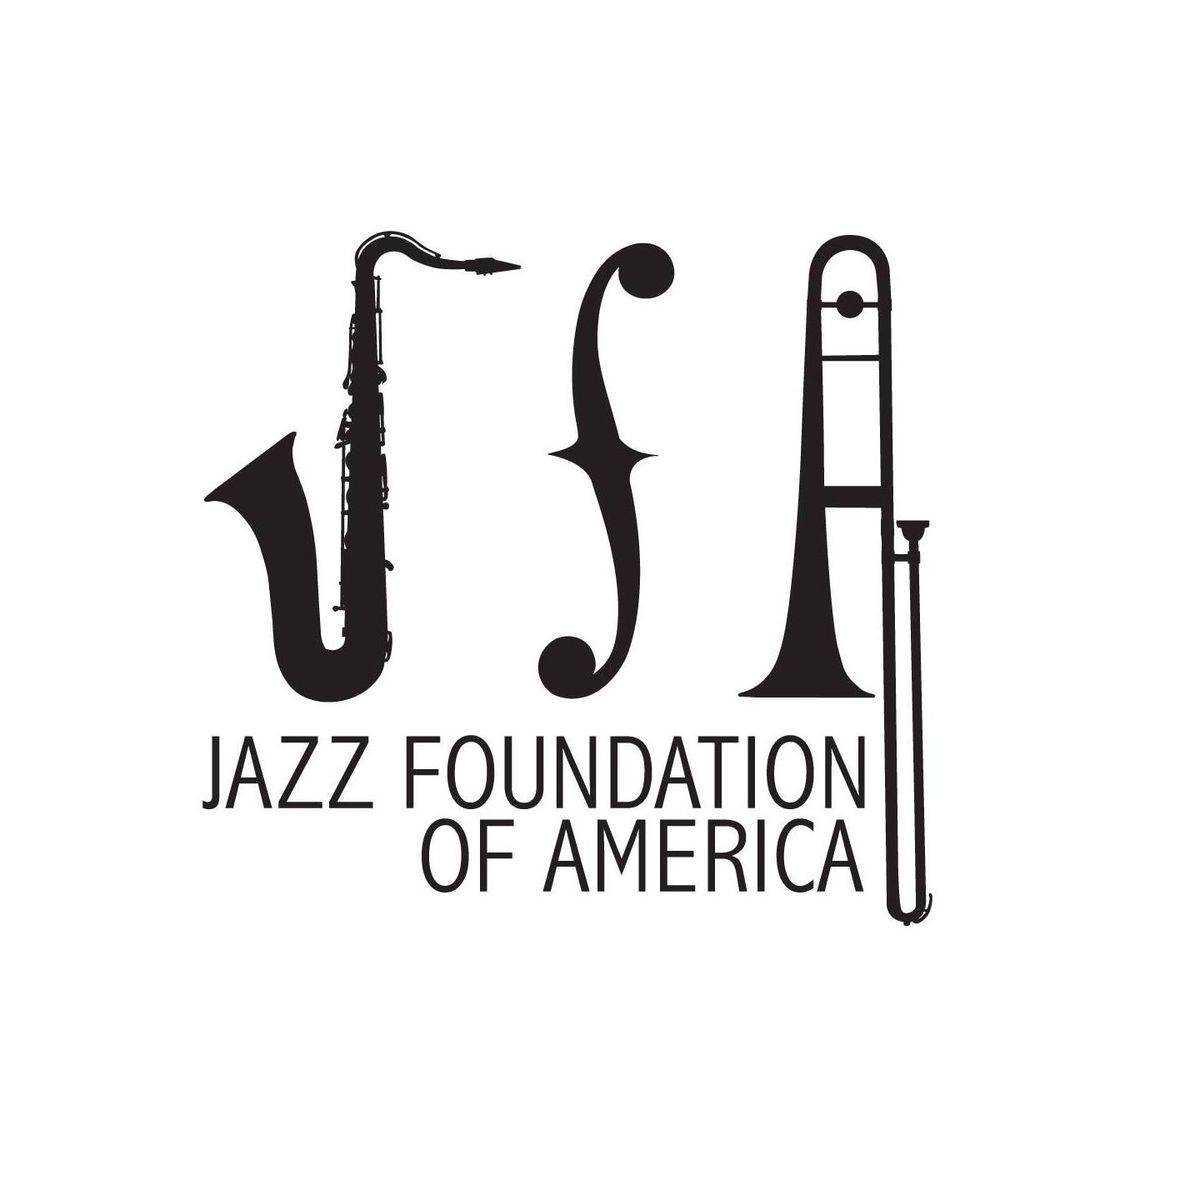 Live From New Orleans The Jazz Foundation of America Presents: Alison Lefevre Solo Piano